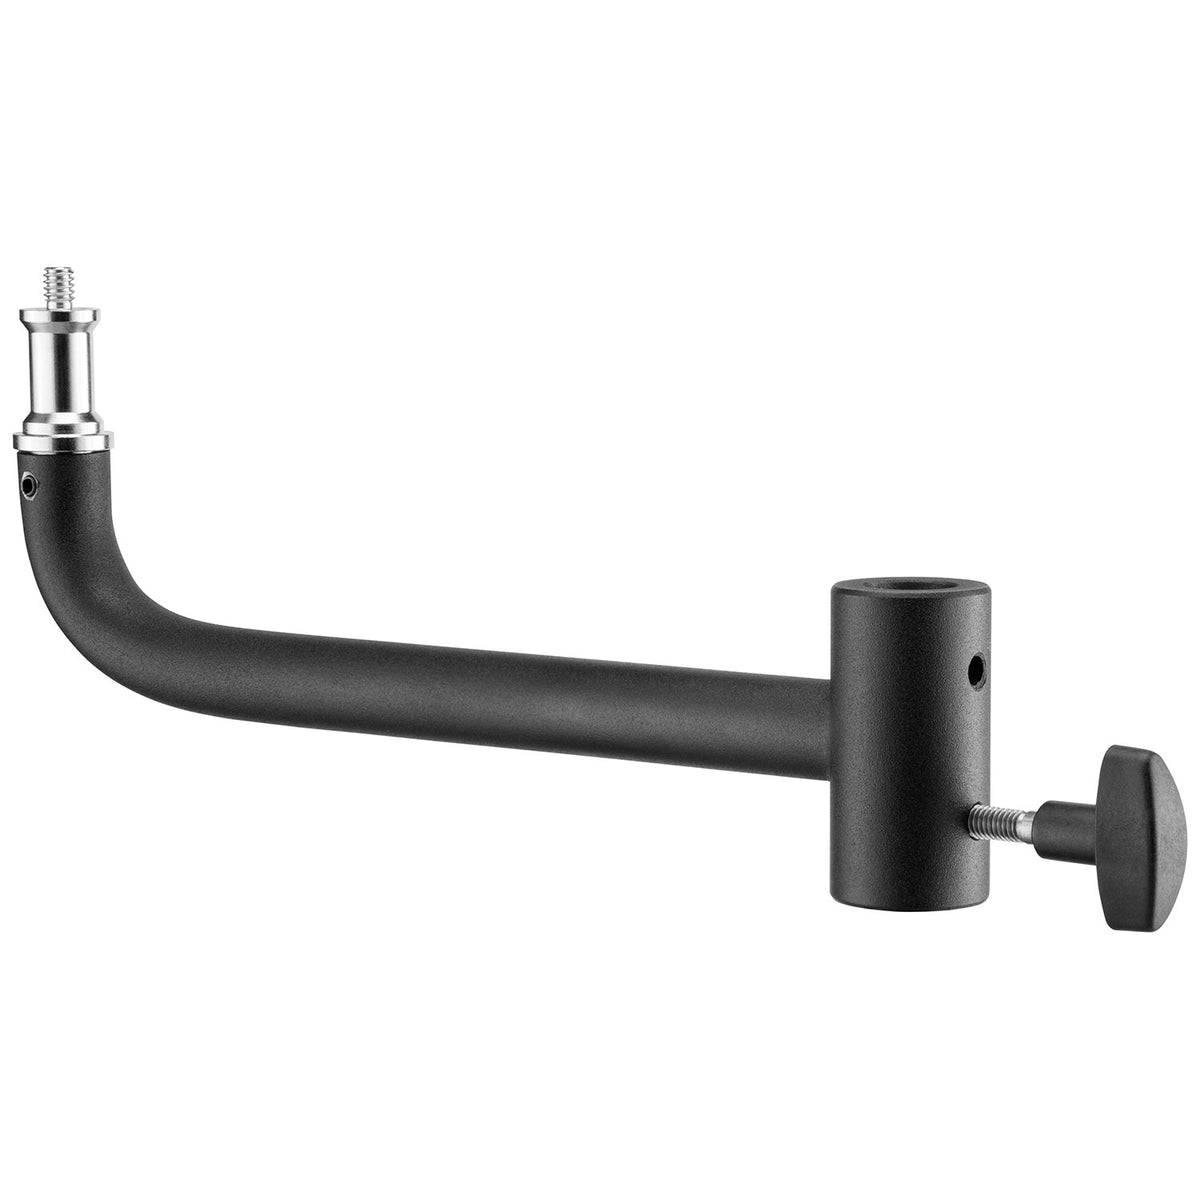 4759 - 8” Shorty Offset Extension Arm